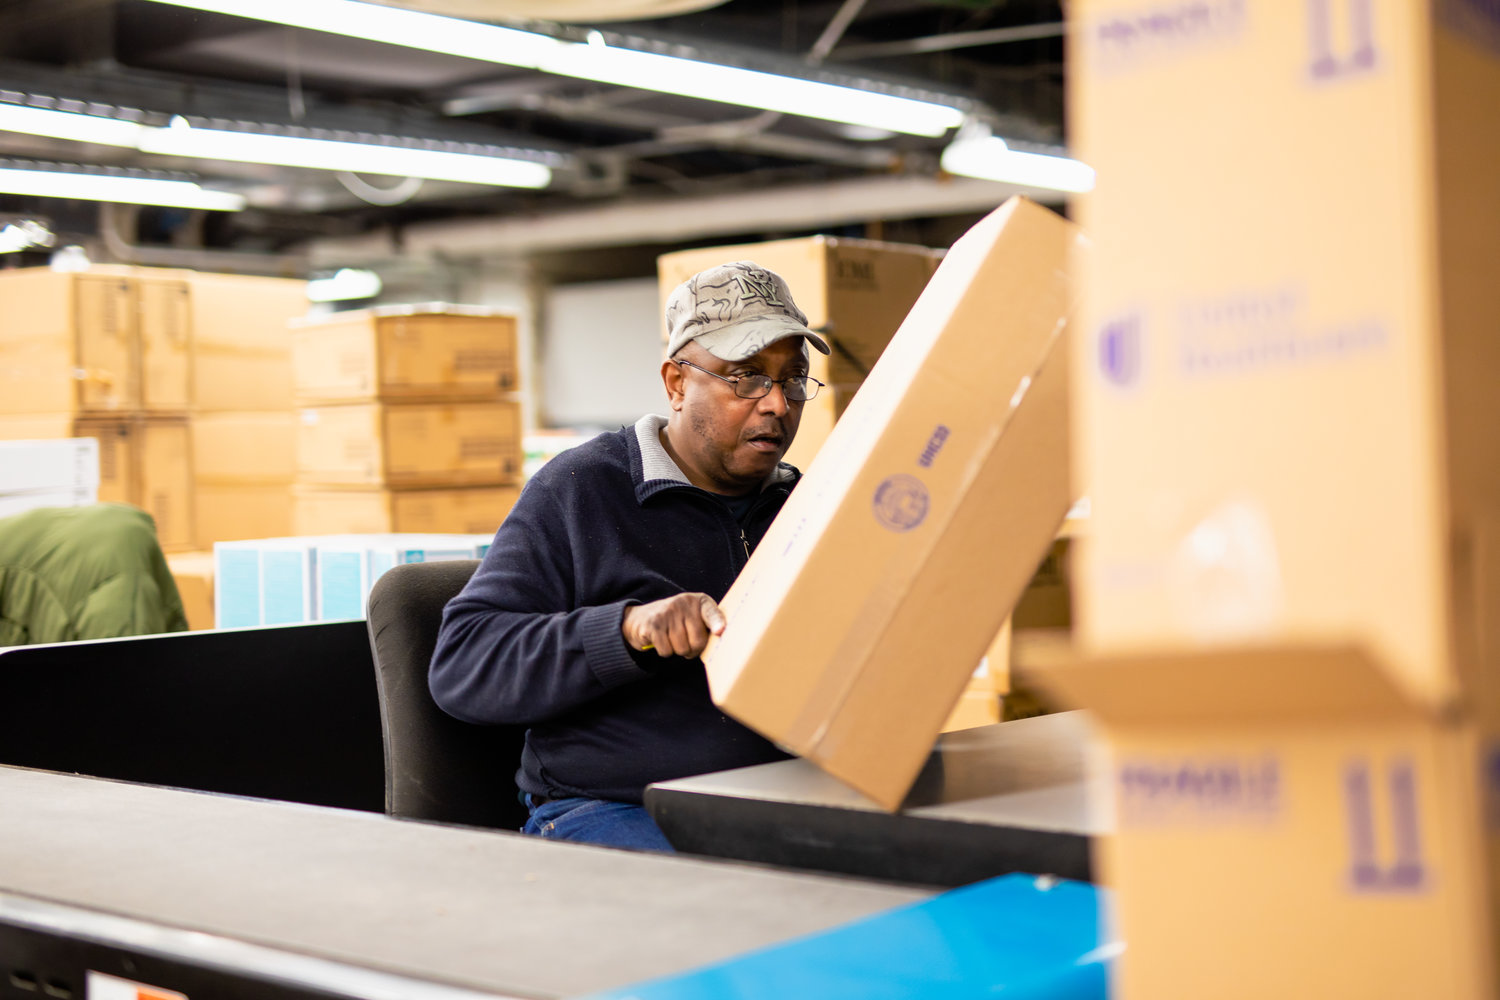 A CABVI employee packages a home health kit. A total of 38,901 home health kits were built in just 10 business days by a team from CABVI’s Central Industries.